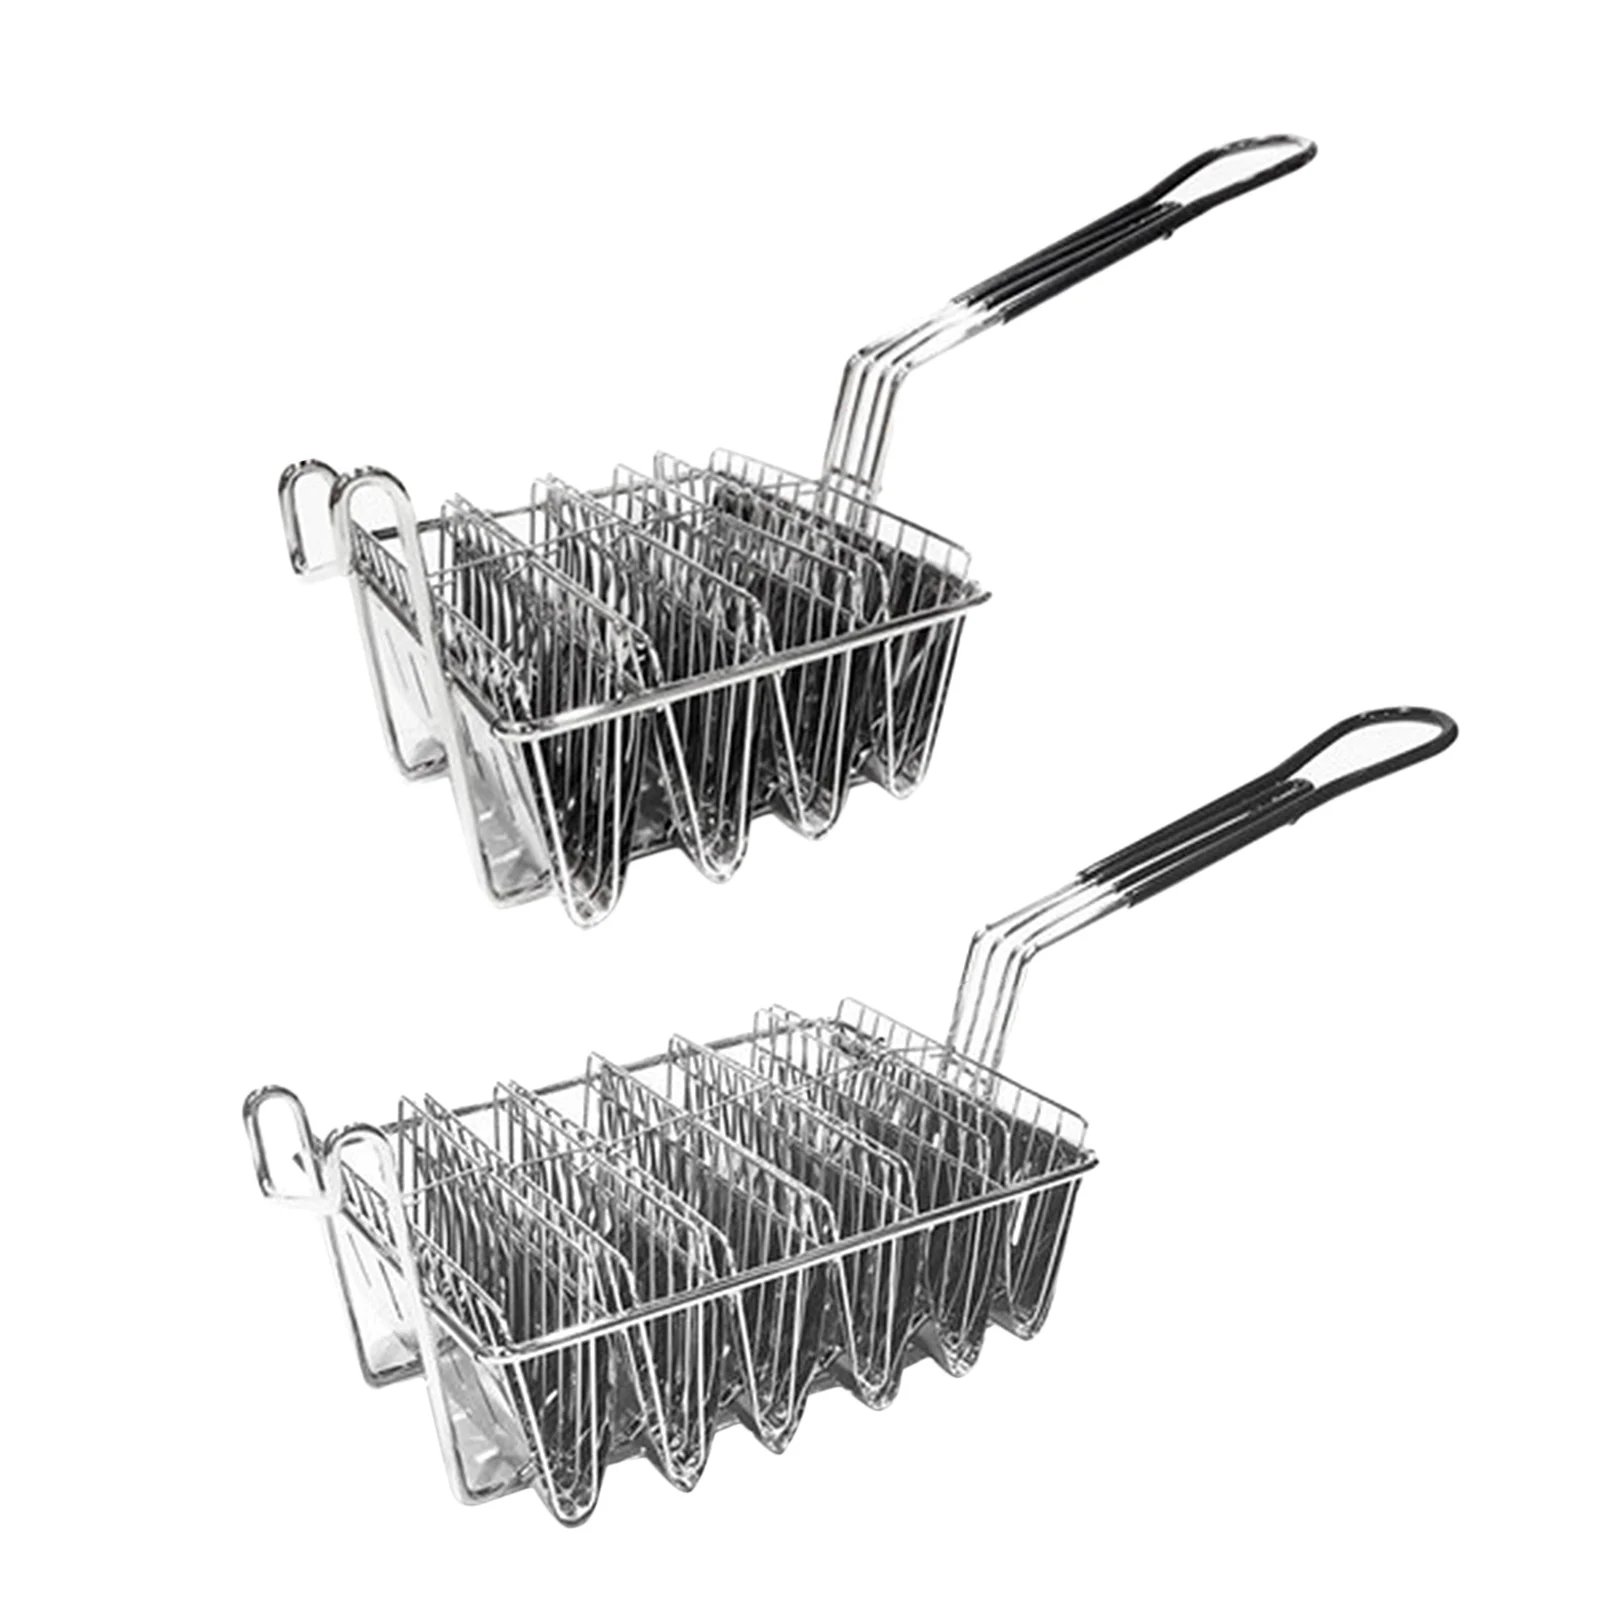 Taco Deep Shell Fryer Taco Holder Basket with Grip Handle, Practical Kitchen Supplies